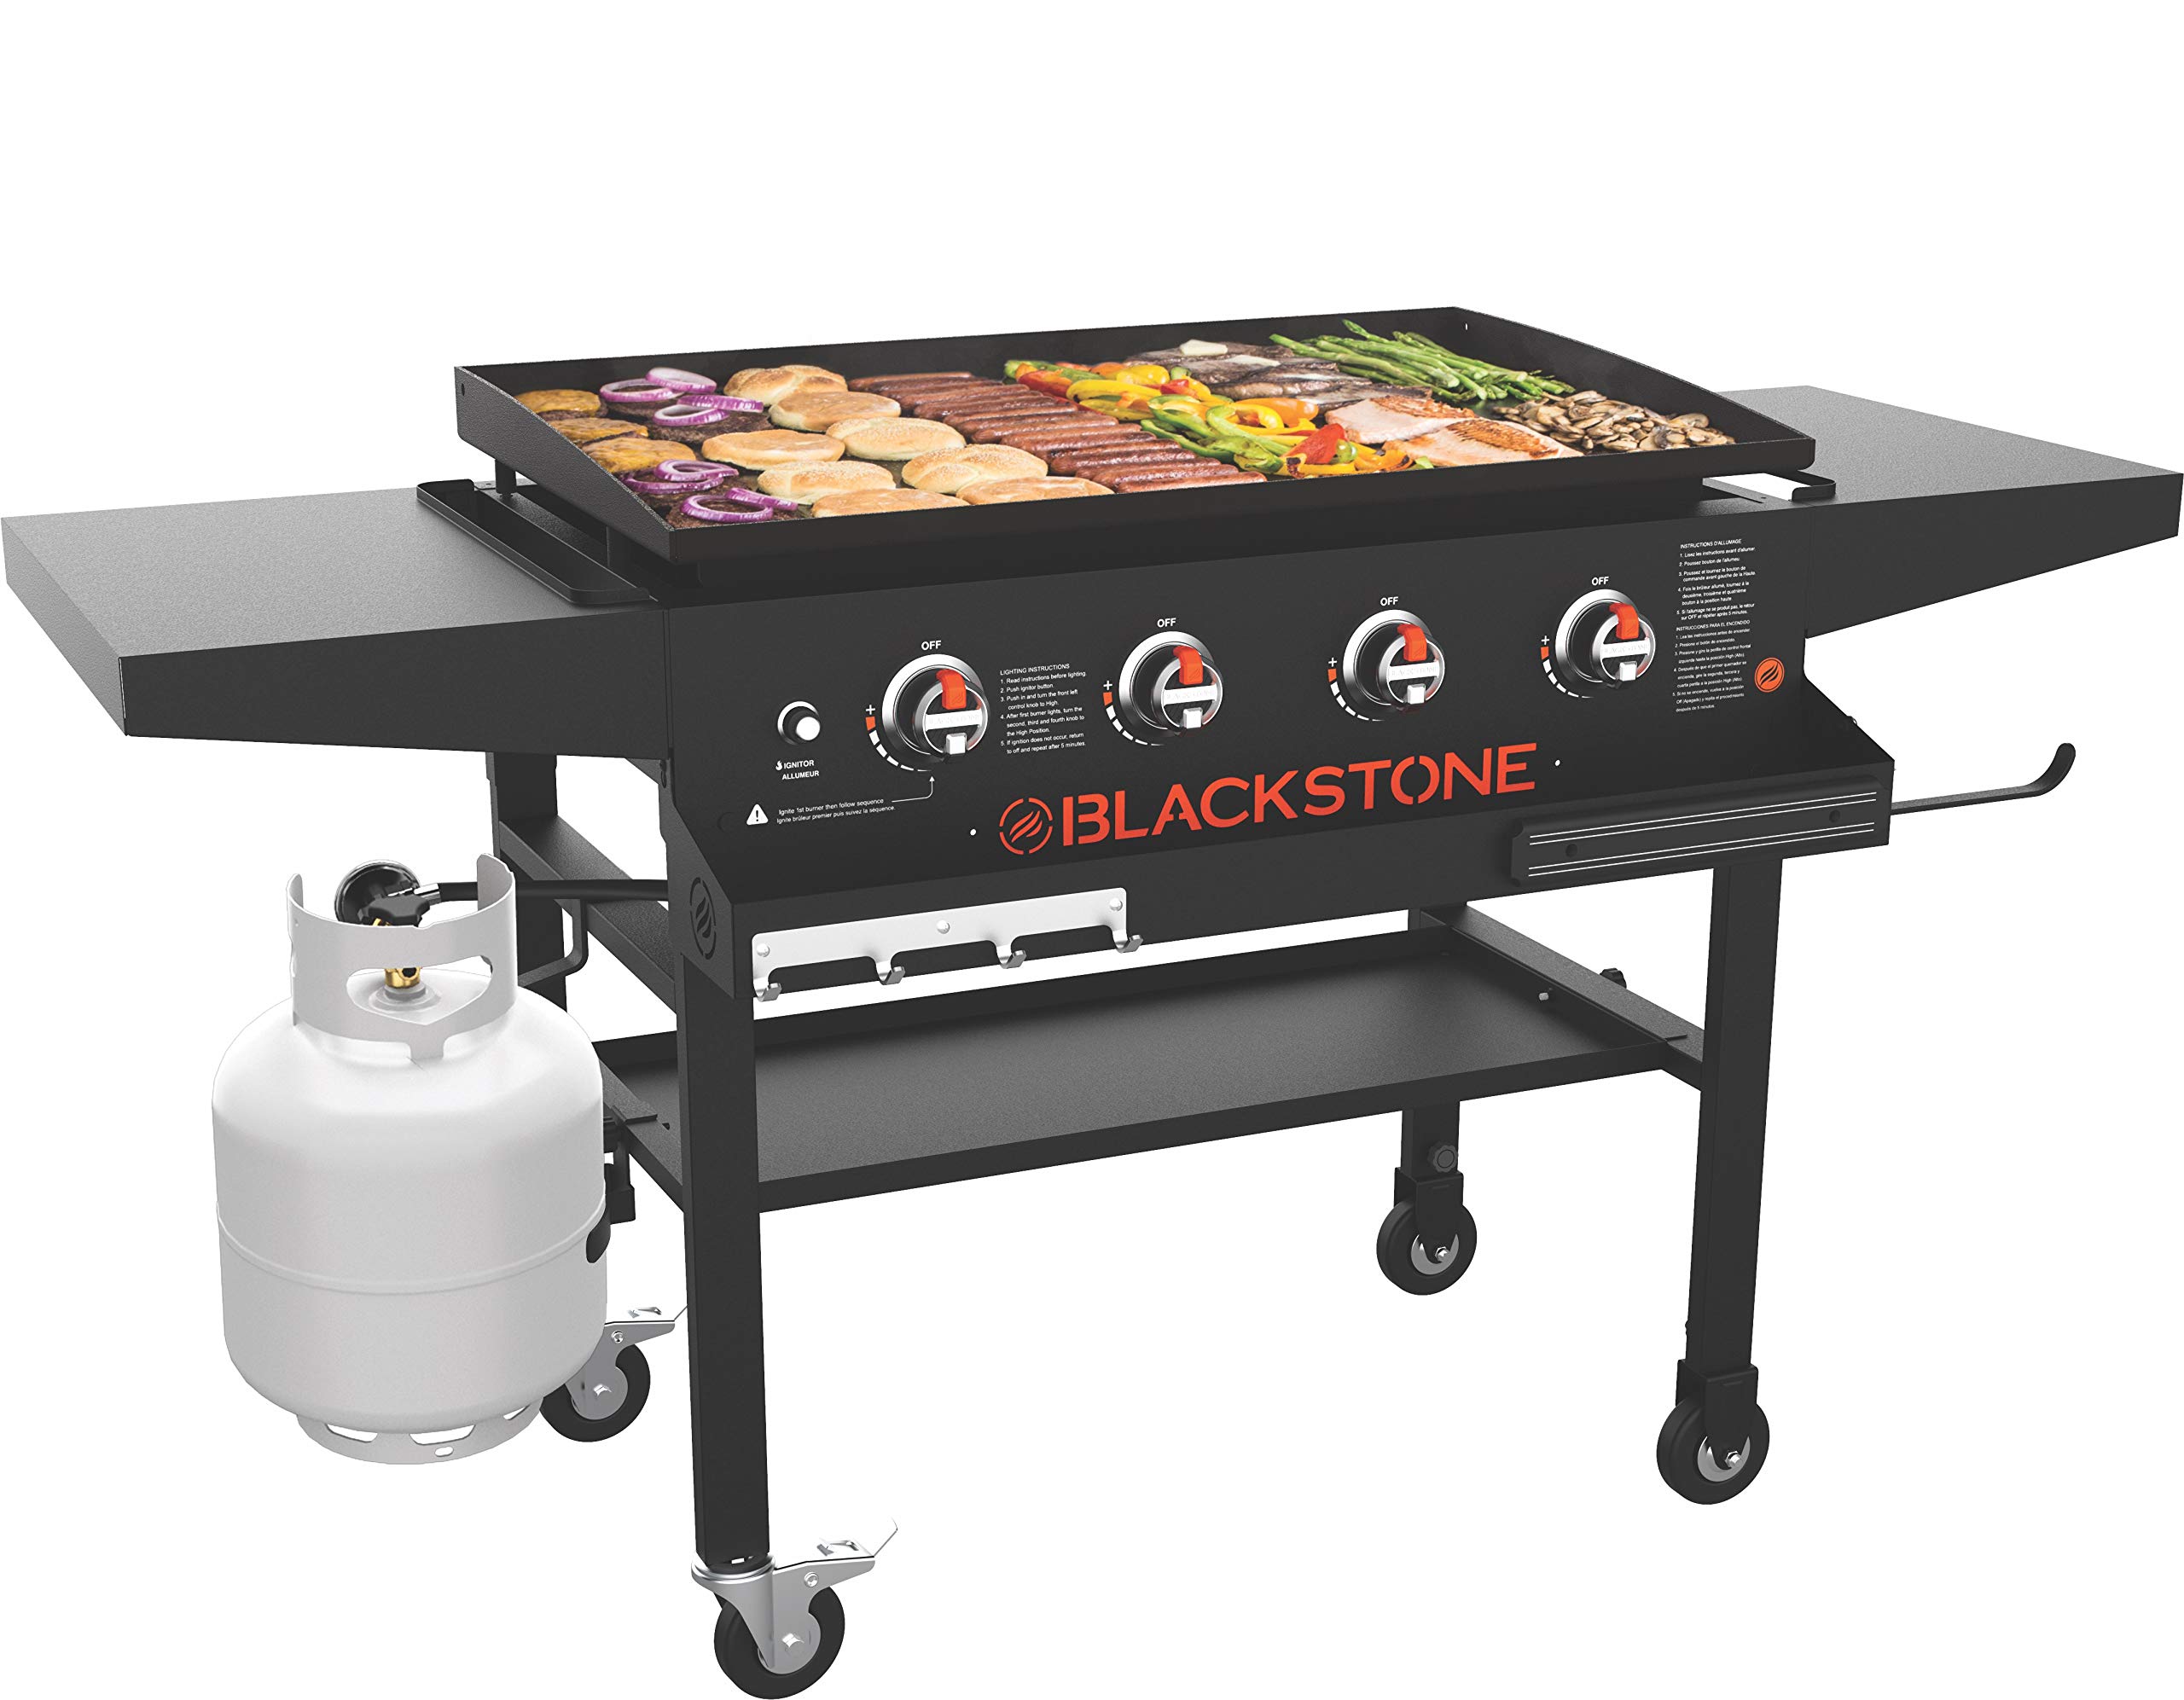 Grilling Gone Mobile: The 6 Best Portable Grills for Camping and Tailgating